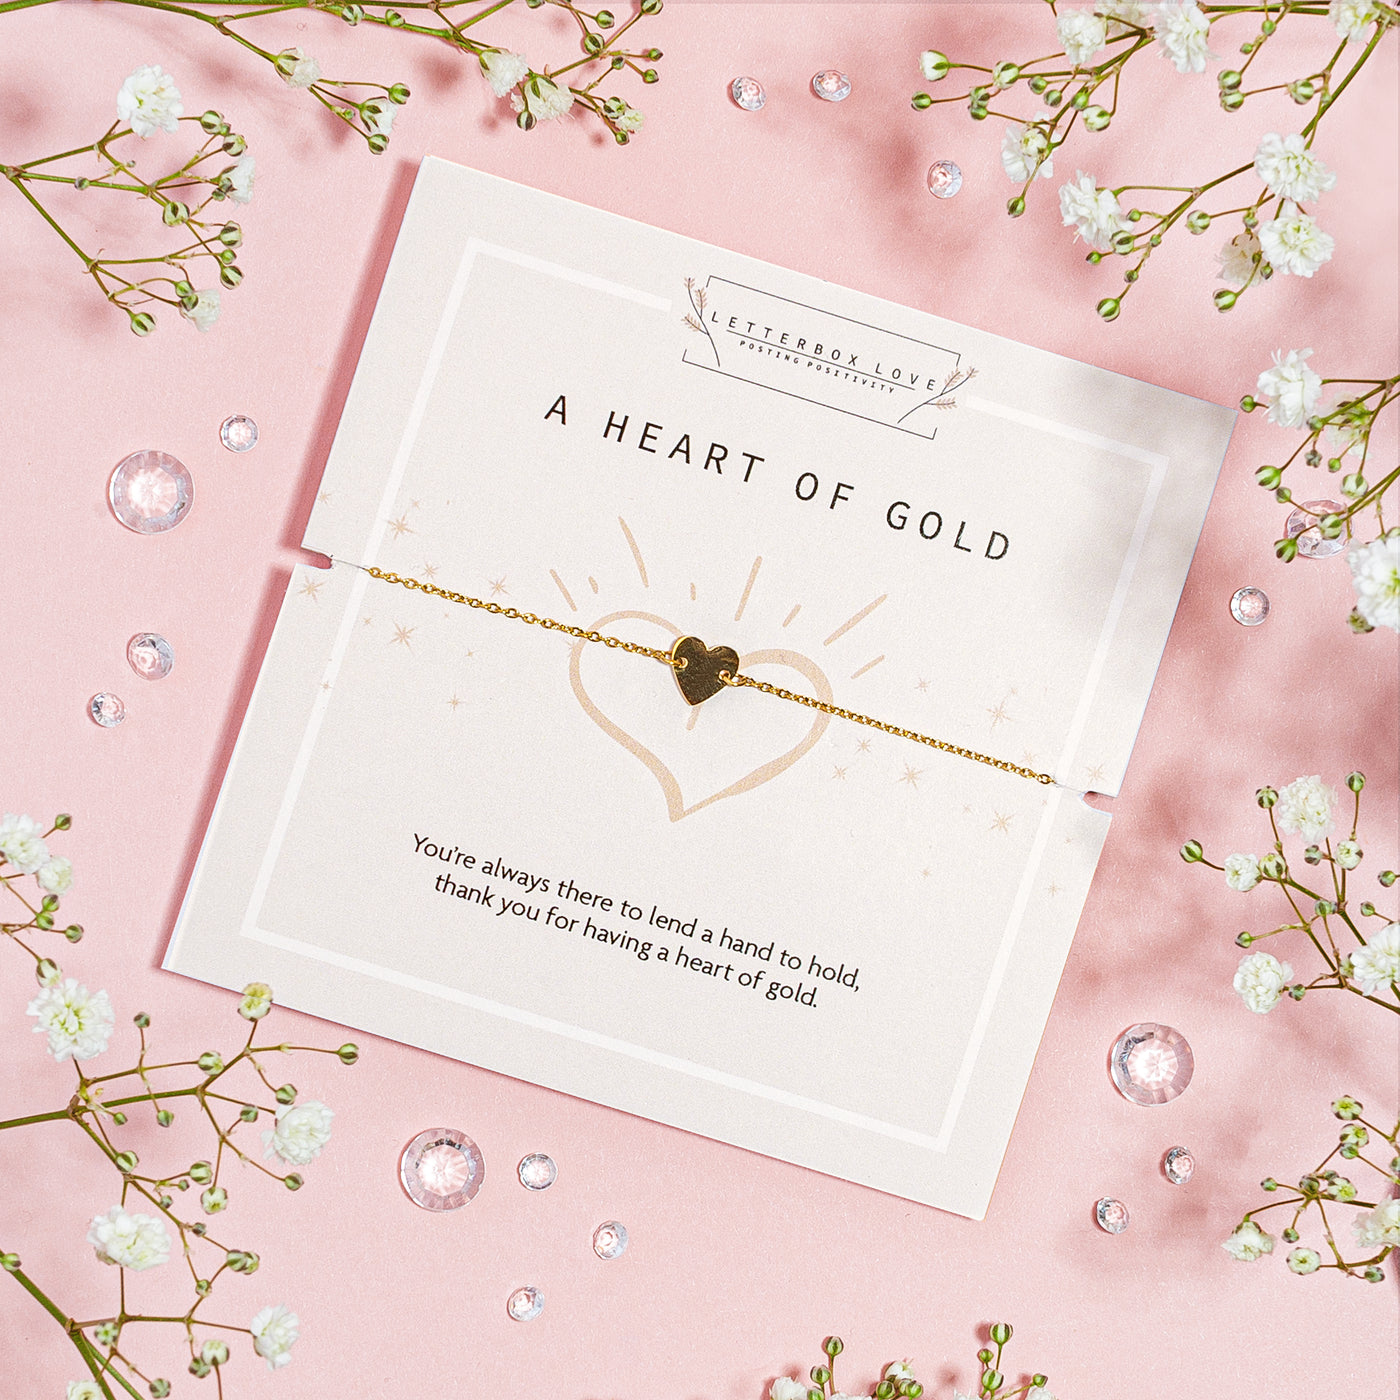 Gold heart charm bracelet presented on a 'Heart of Gold' card with an appreciative message, surrounded by delicate baby's breath on a soft pink backdrop with scattered crystals, conveying gratitude and affection.